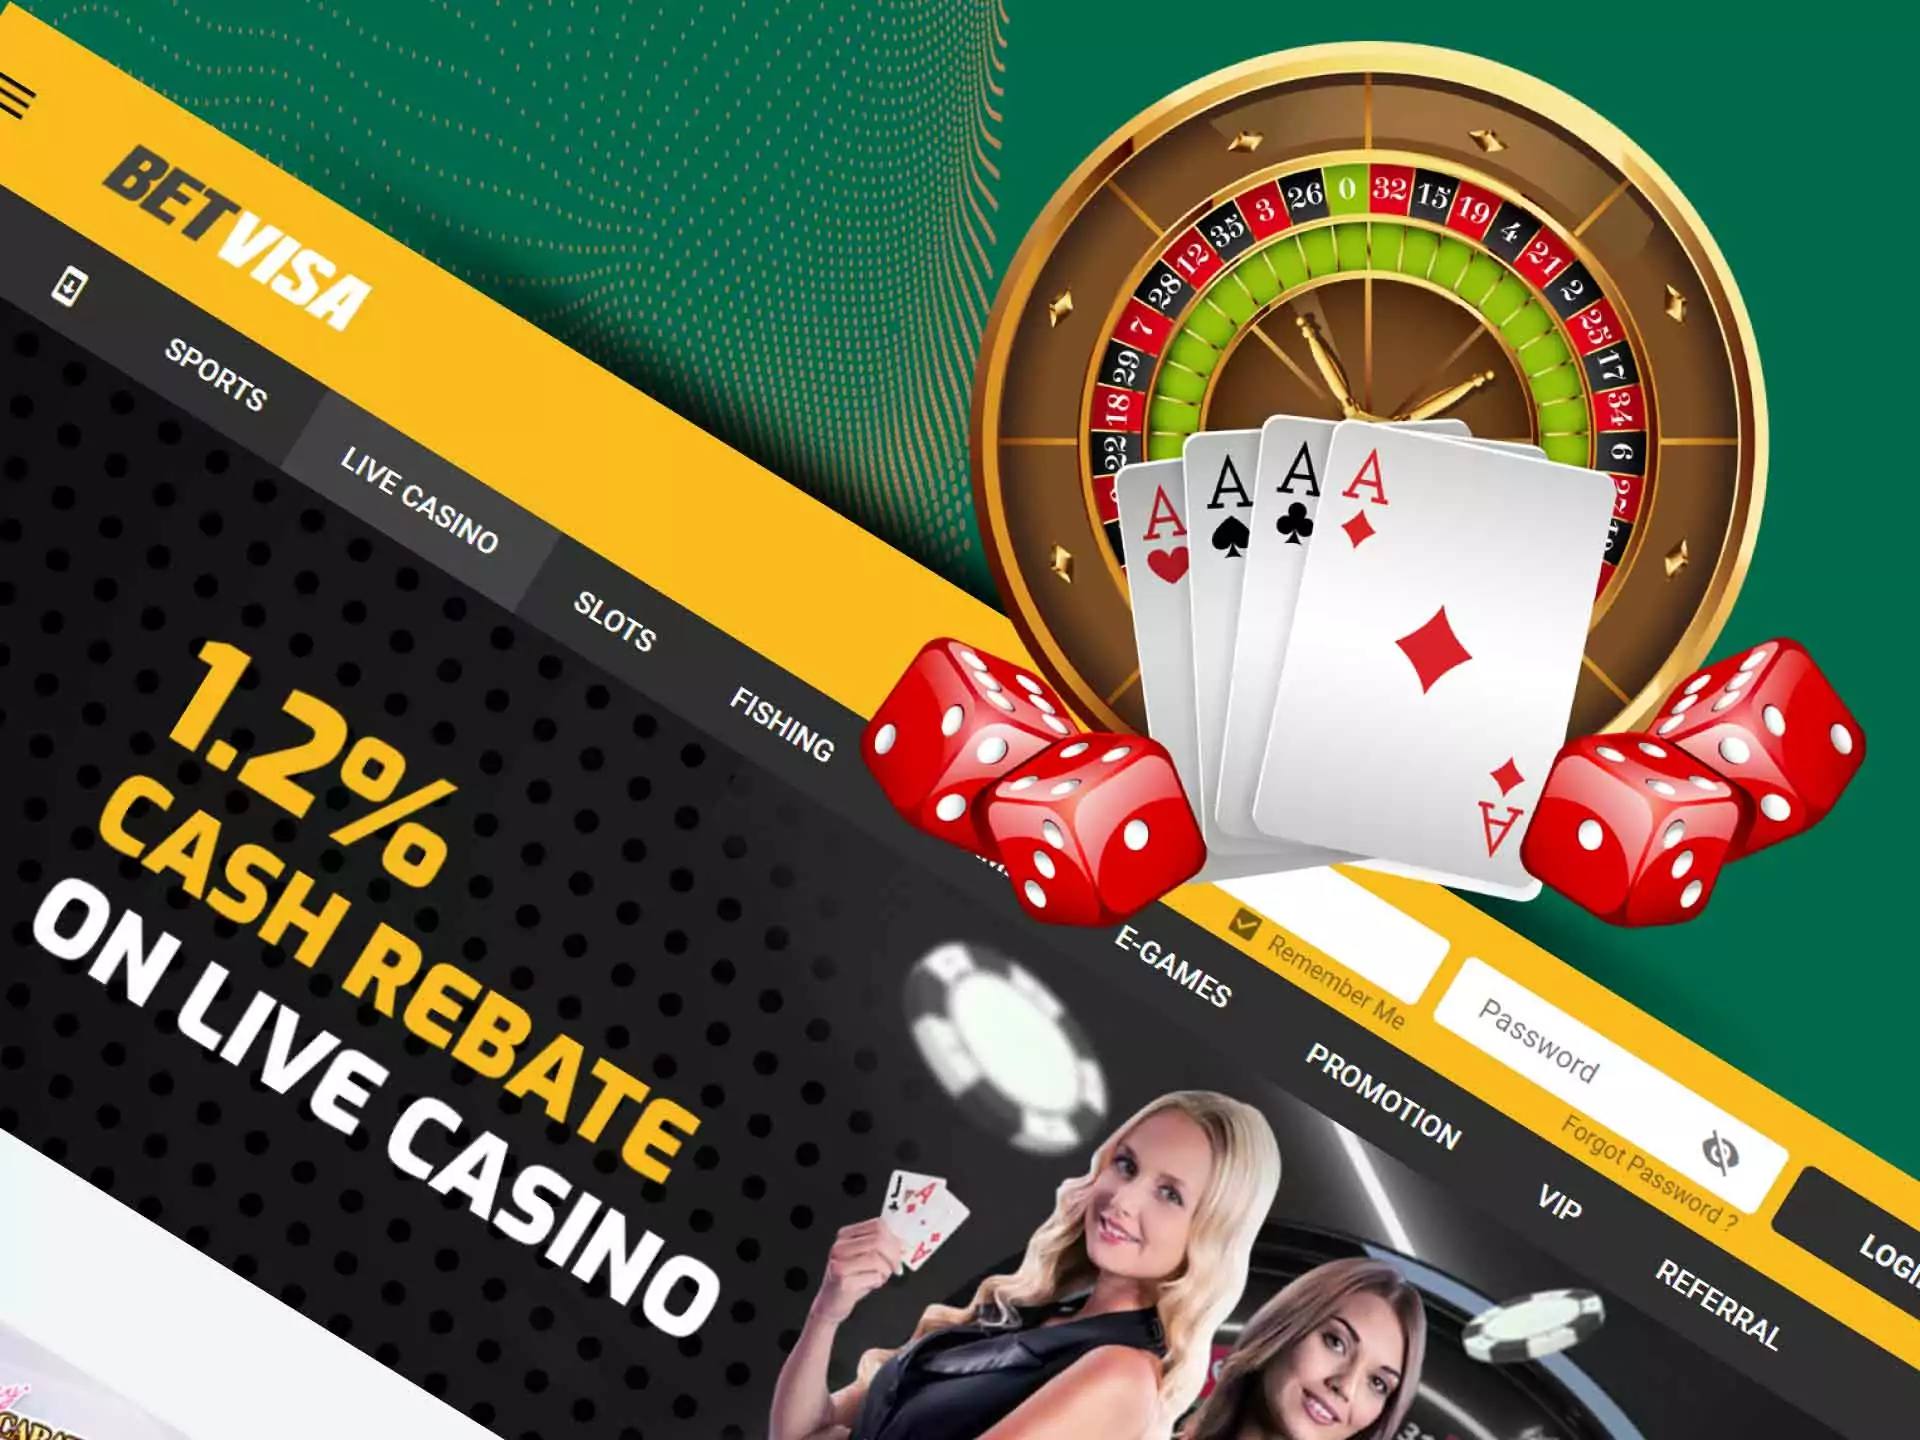 There is also an online casino section at BetVisa.